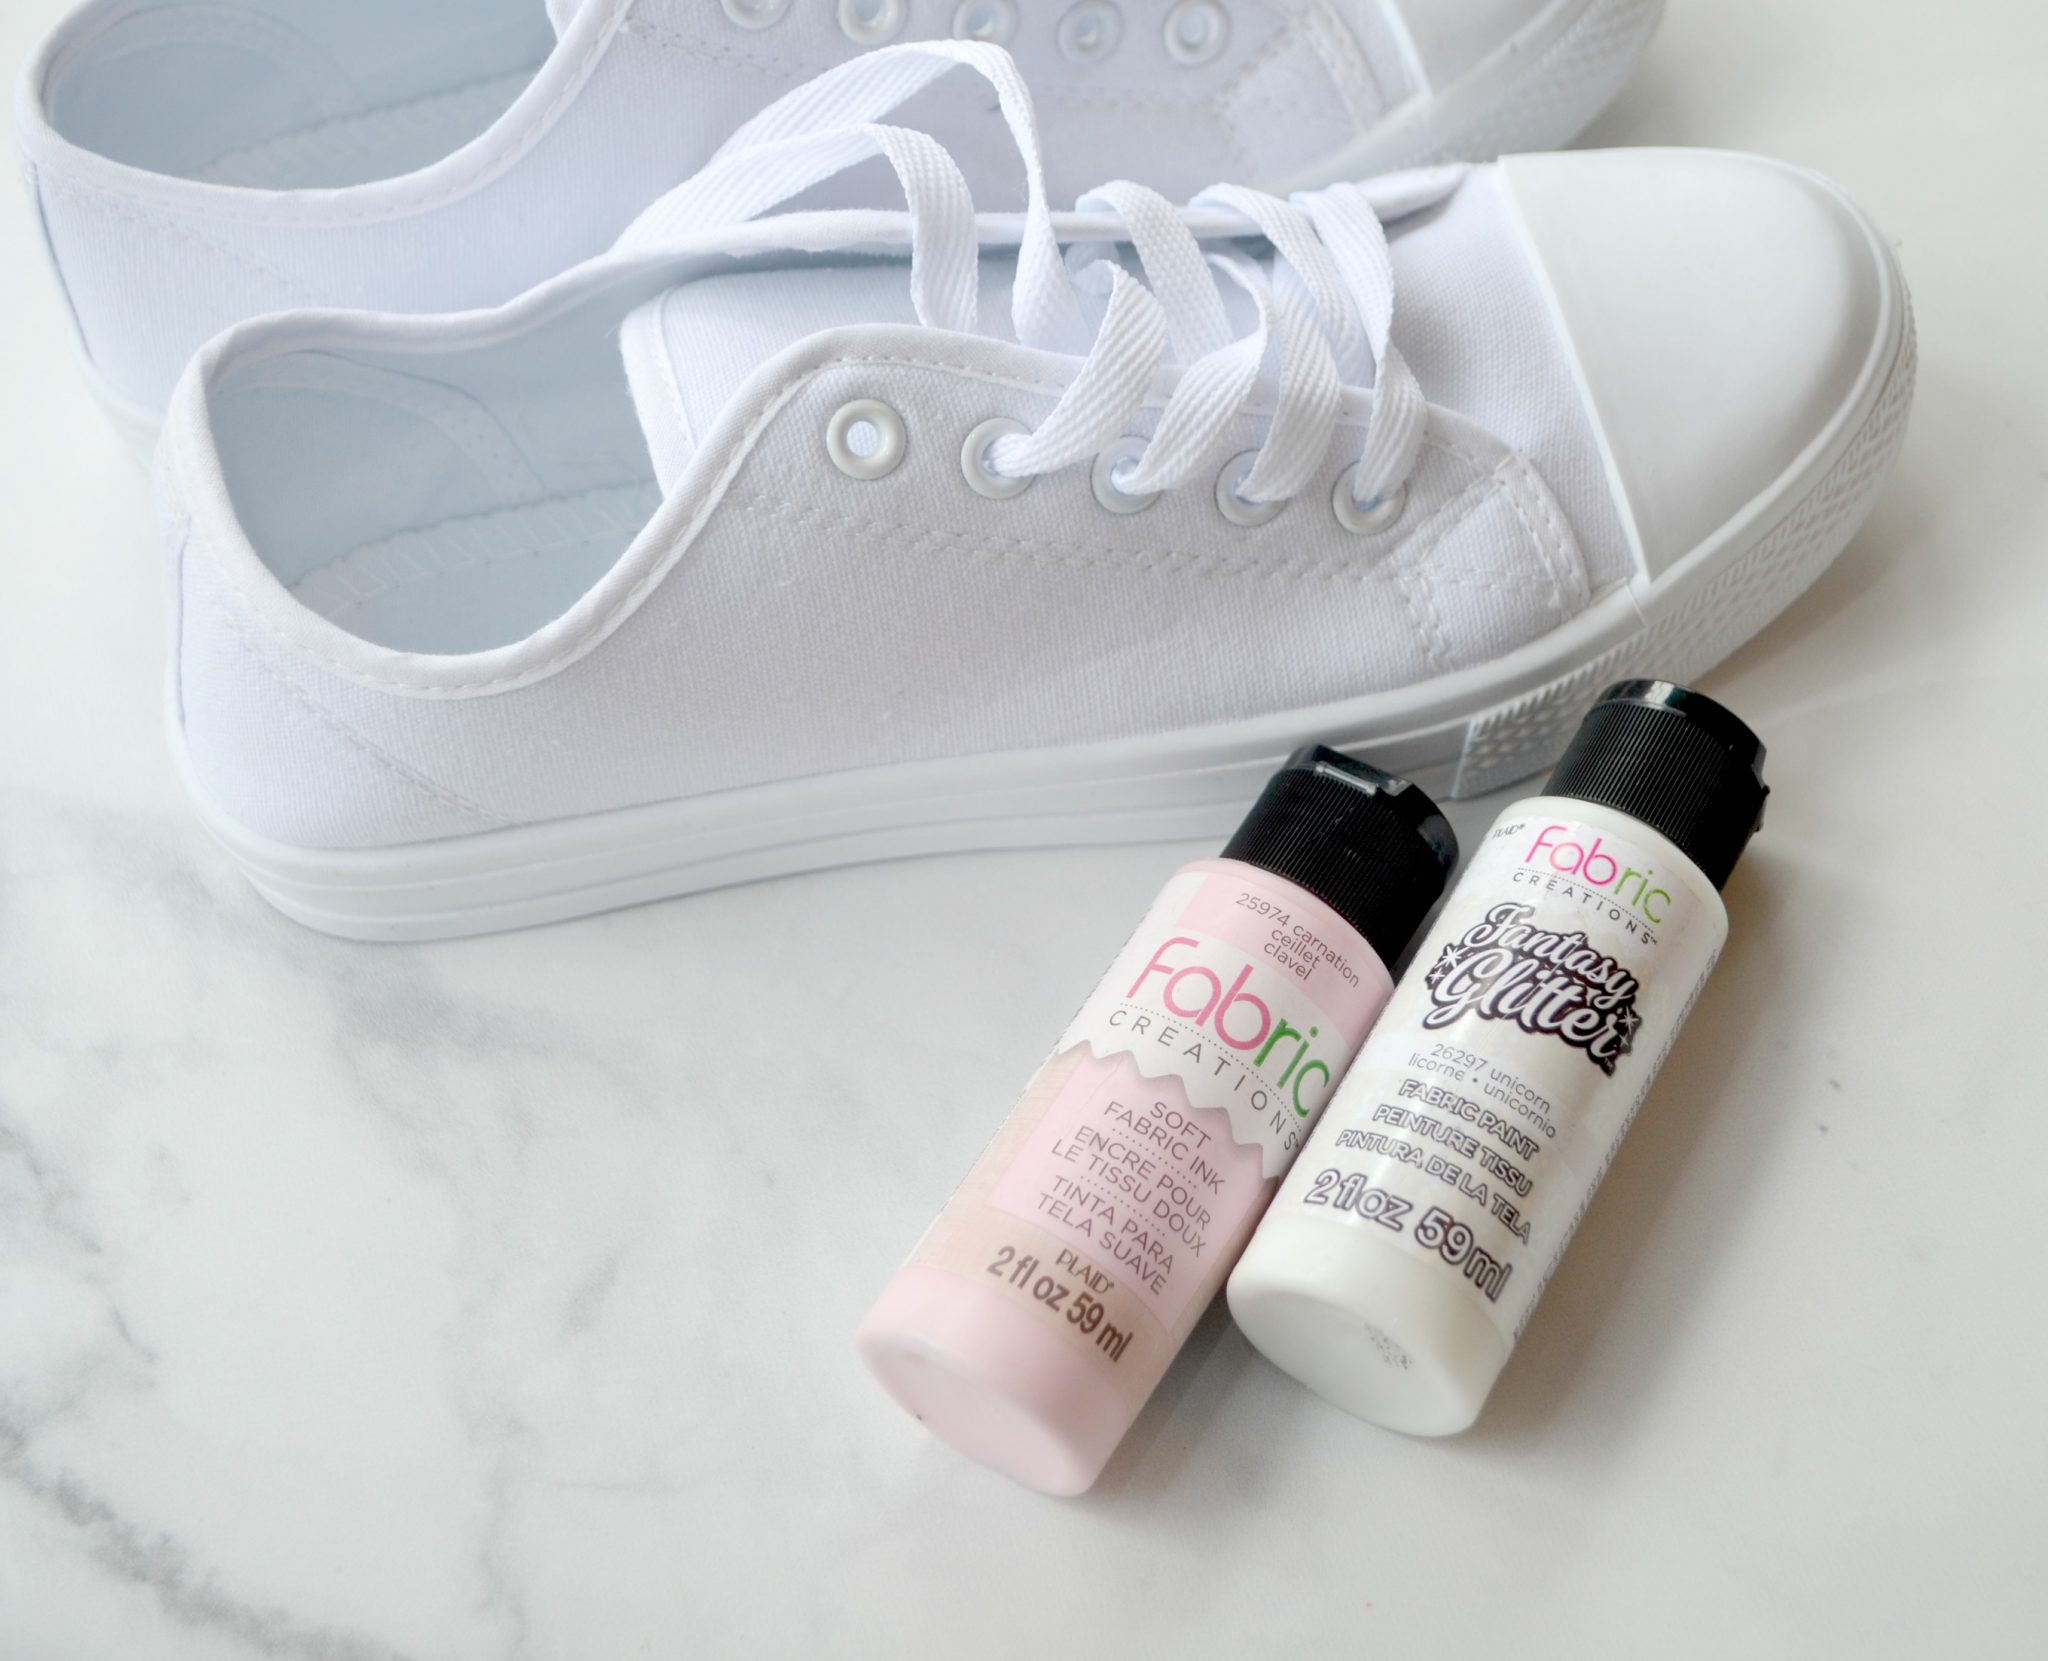 DIY shoes makeover idea - Decorate old sneakers with lace!